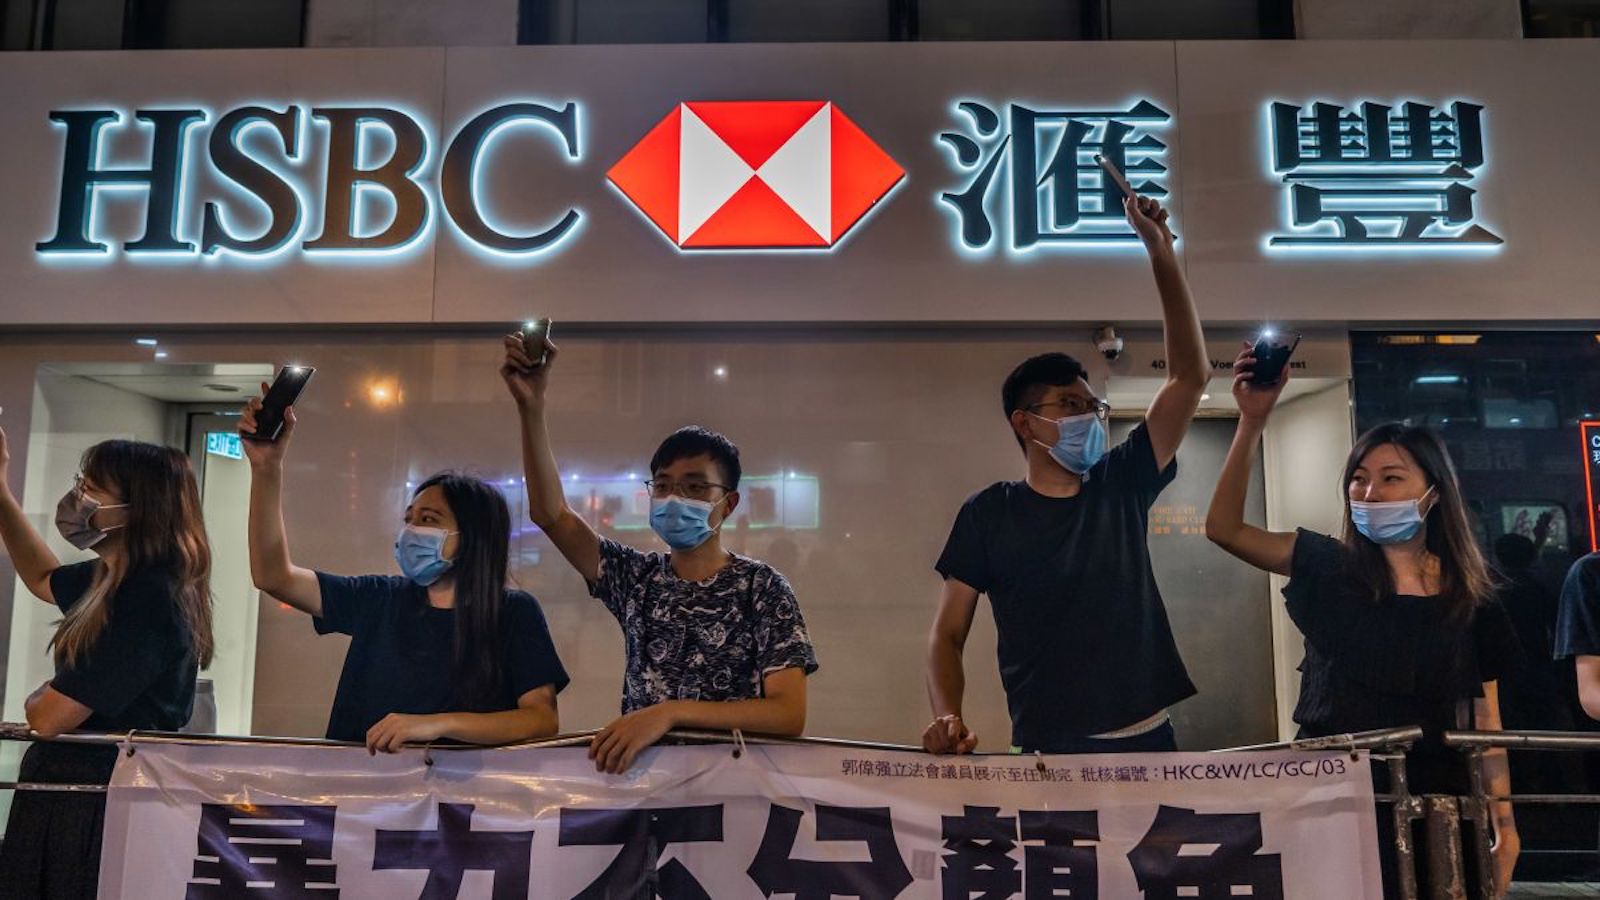 HSBC offers US$5.2 billion in loans to small business owners as Hong Kong's economic recovery gains traction